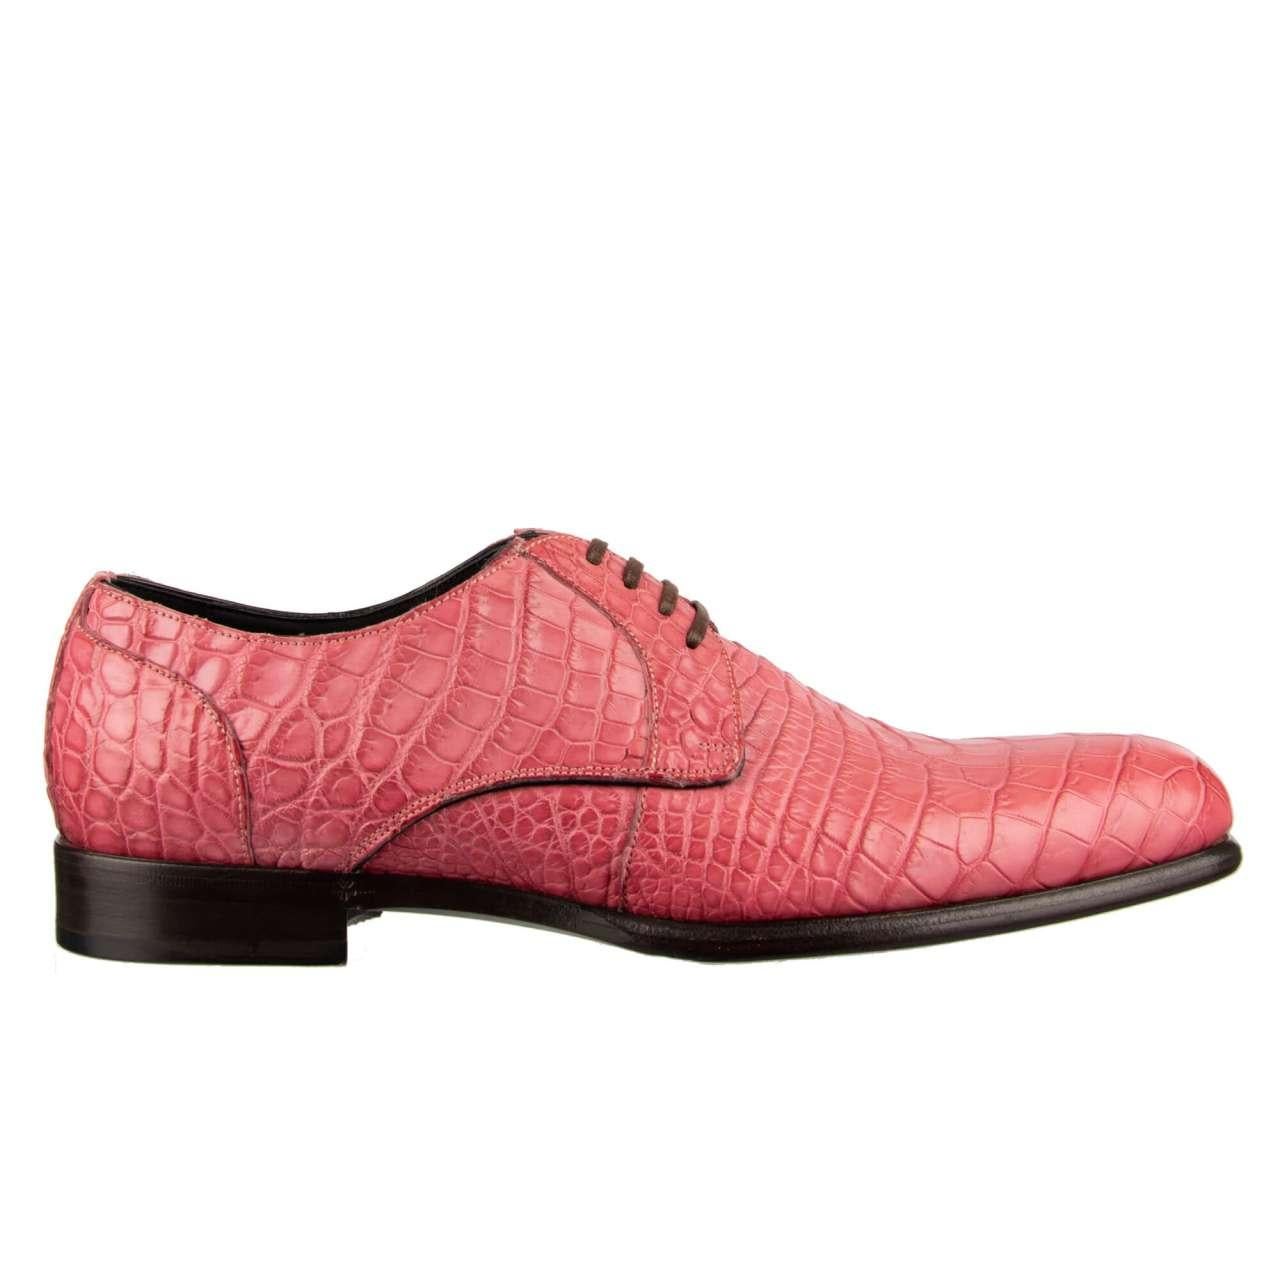 Dolce & Gabbana Crocodile Leather Derby Shoes SIENA Pink EUR 39 For Sale 4